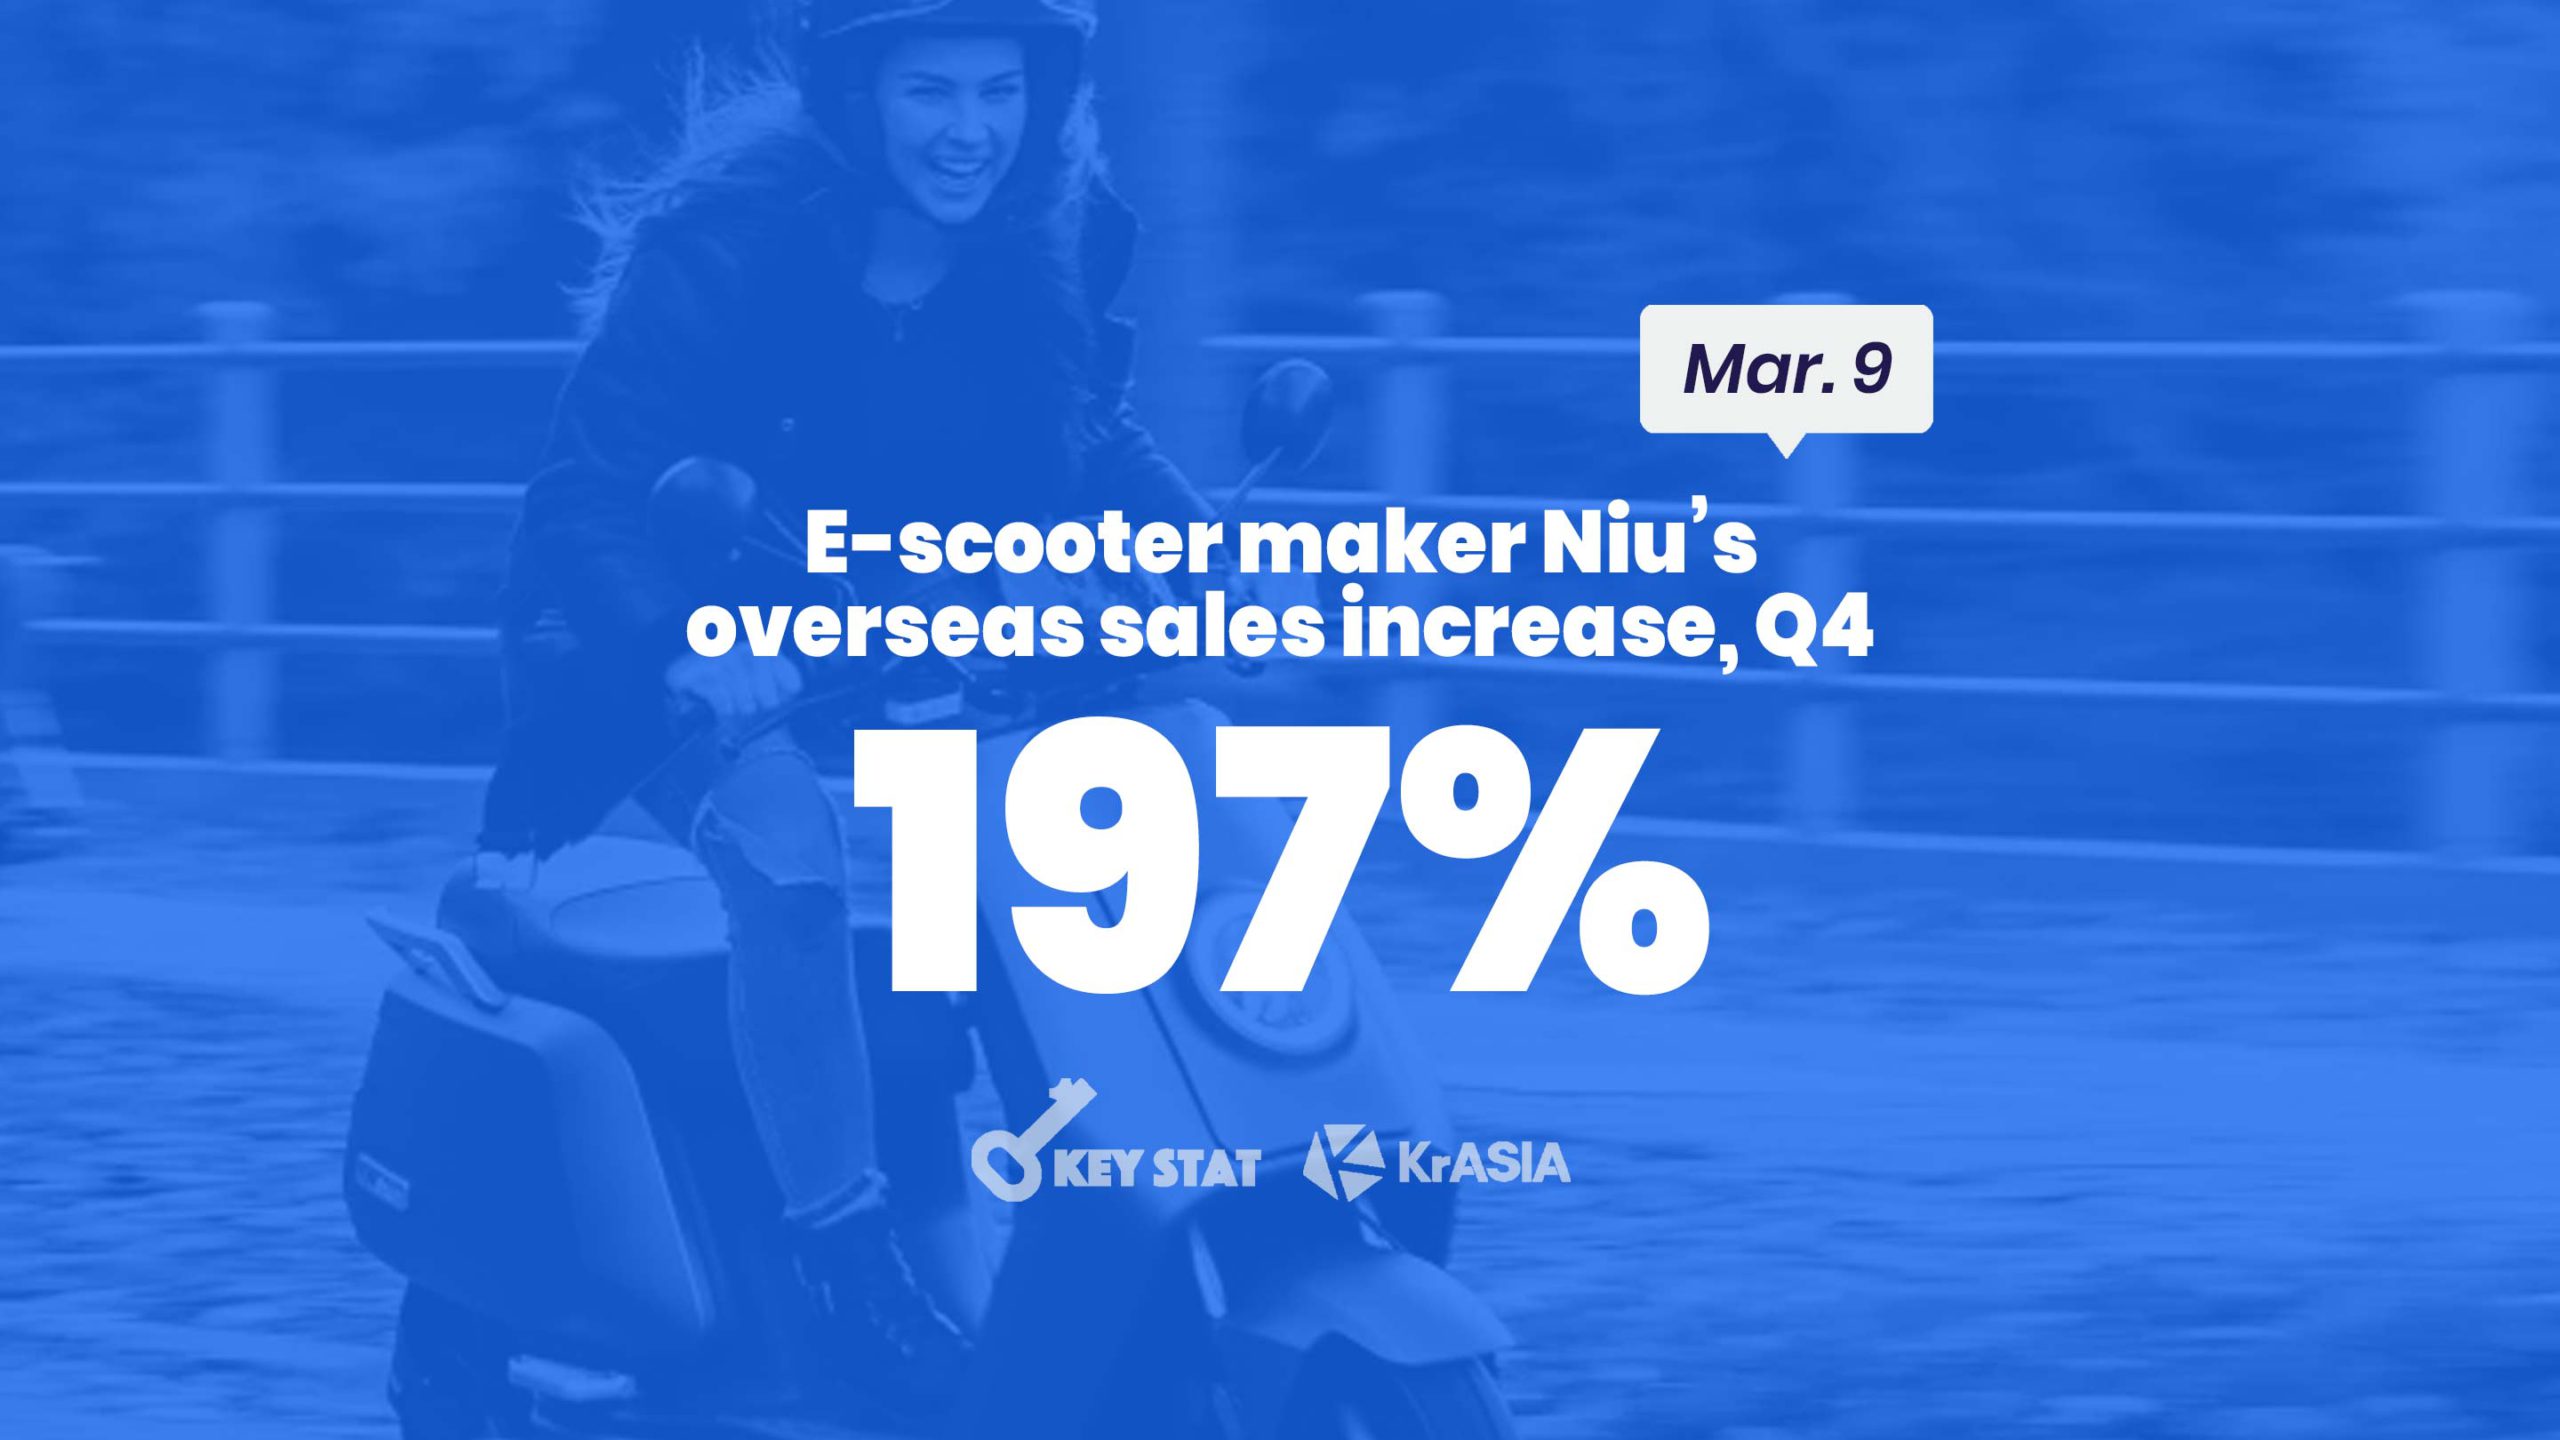 KEY STAT | E-scooter manufacturer Niu triples overseas sales in Q4